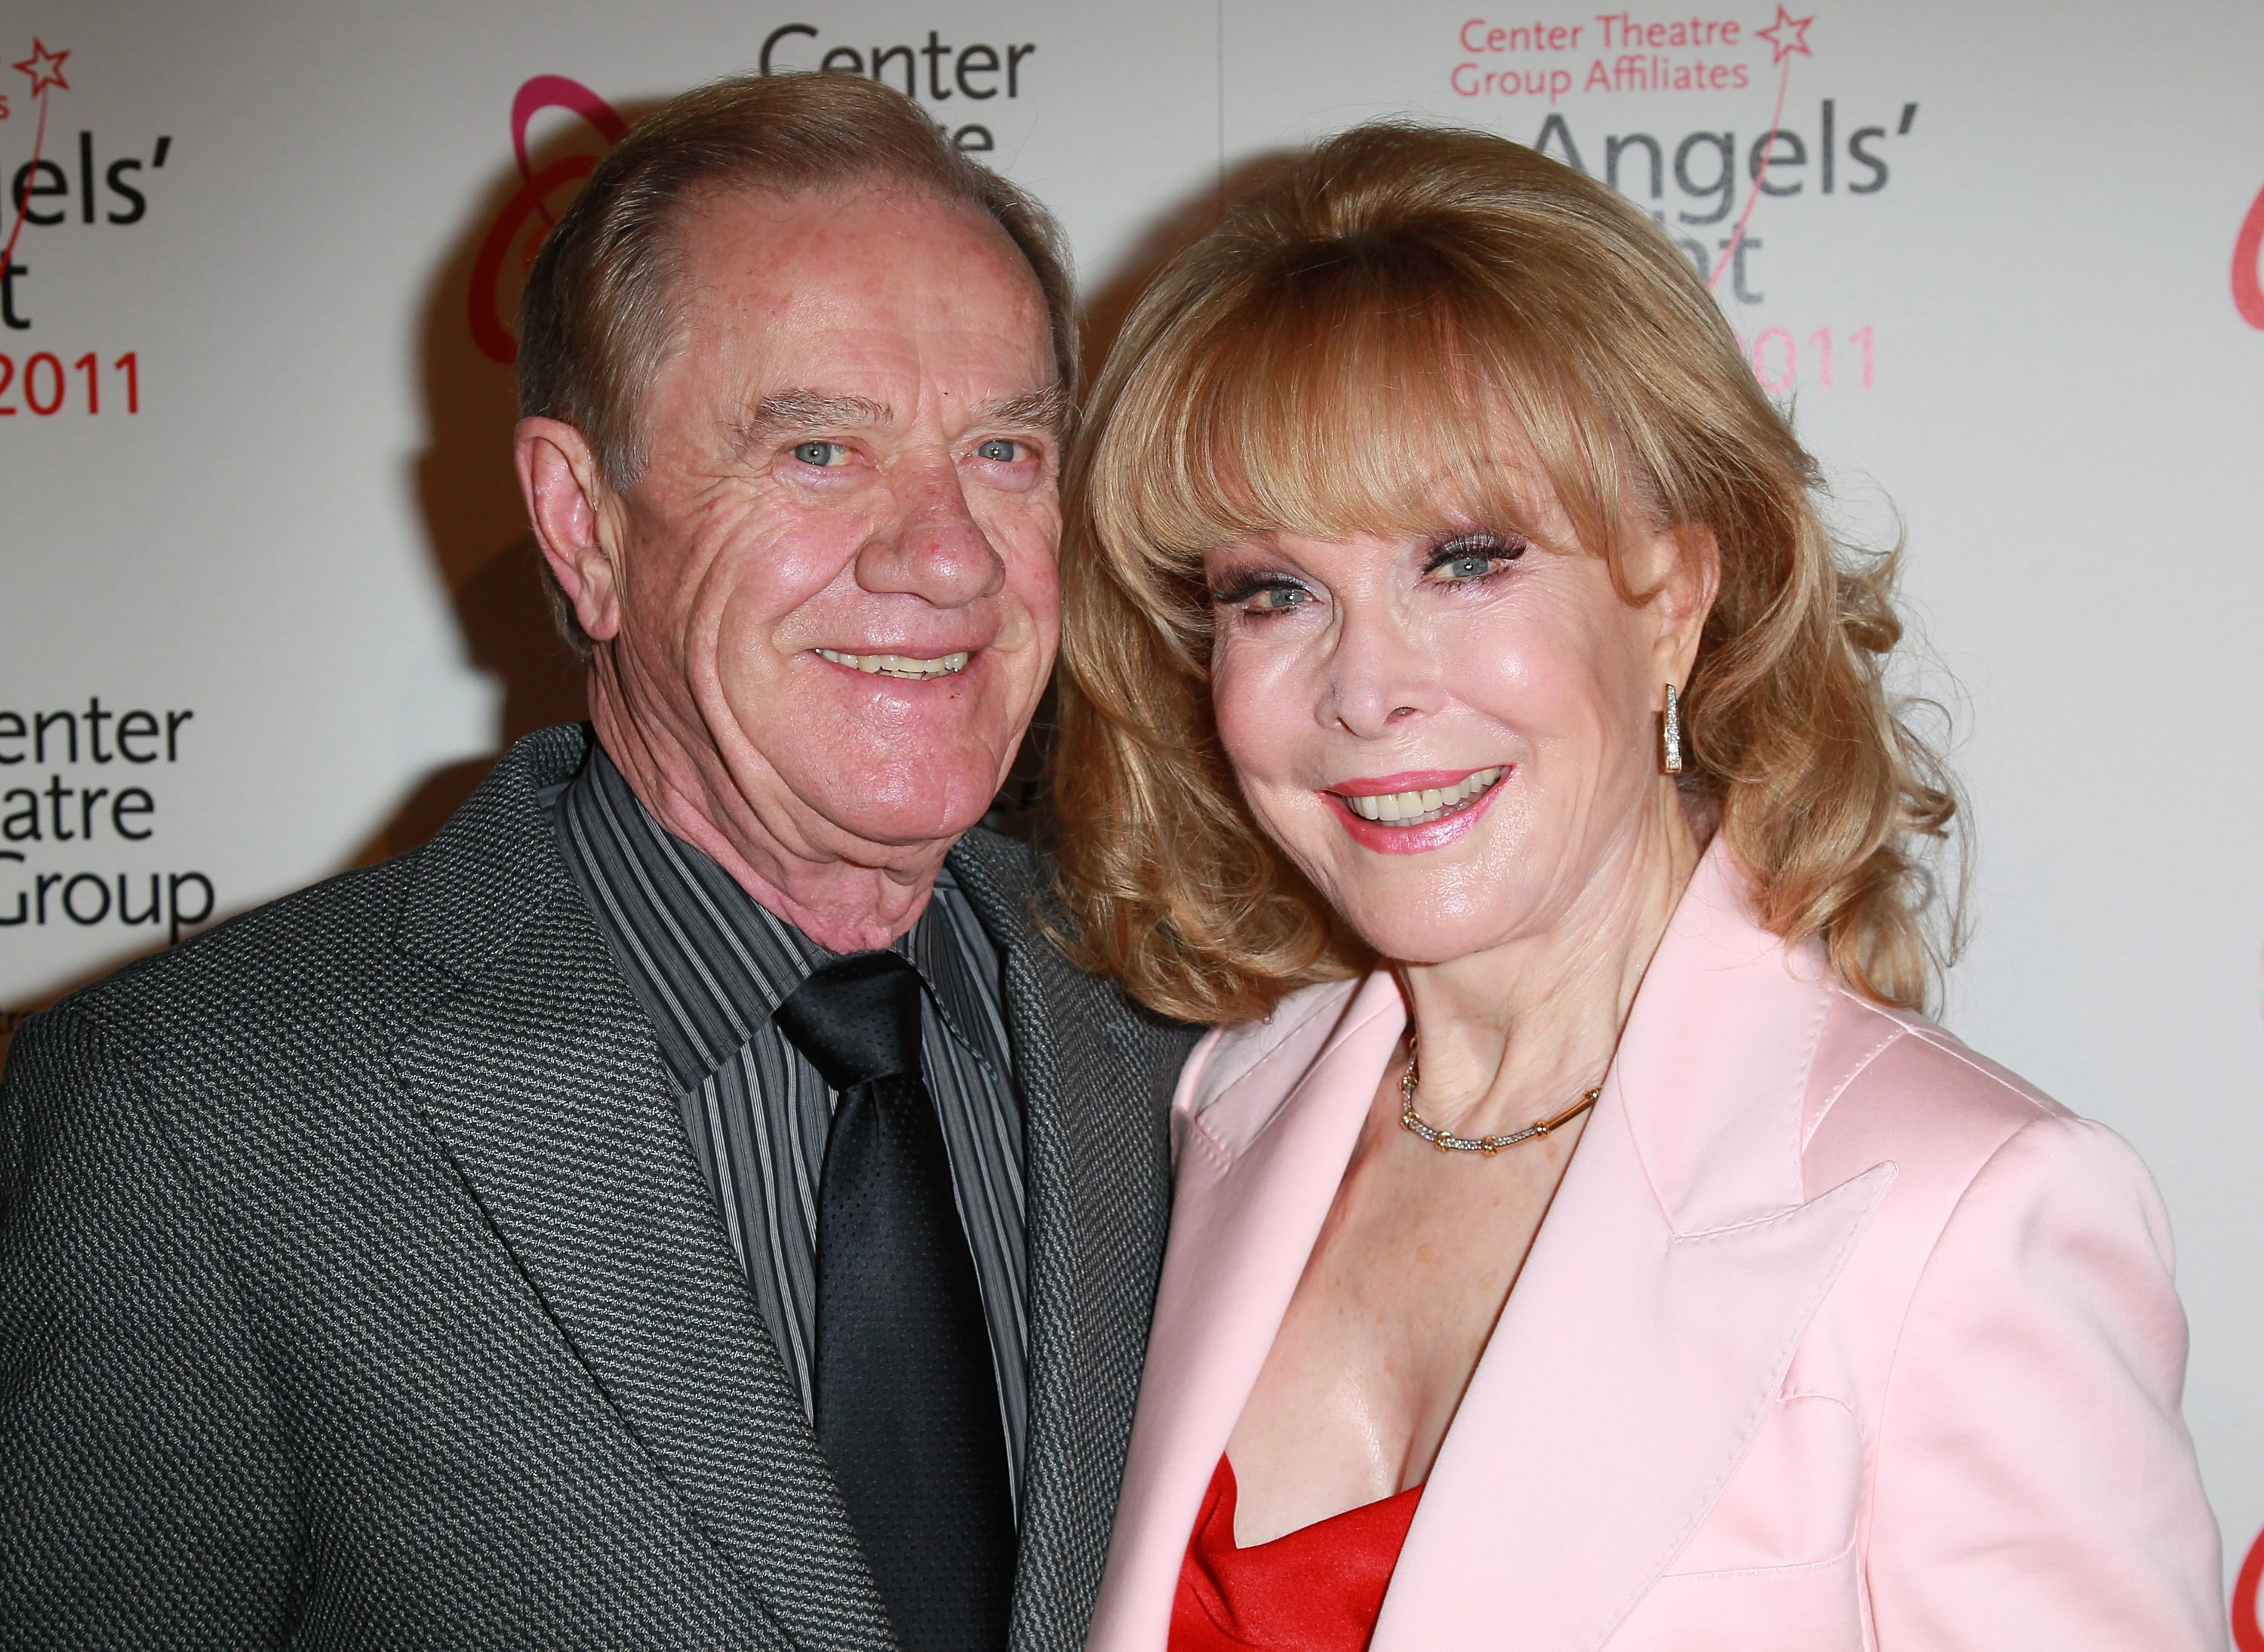 Barbara Eden and Jon Eicholtz at the Center Theatre Group-Affiliates 21st Annual "Angels' Night" Fundraiser on October 30, 2011, in California. | Source: Getty Images